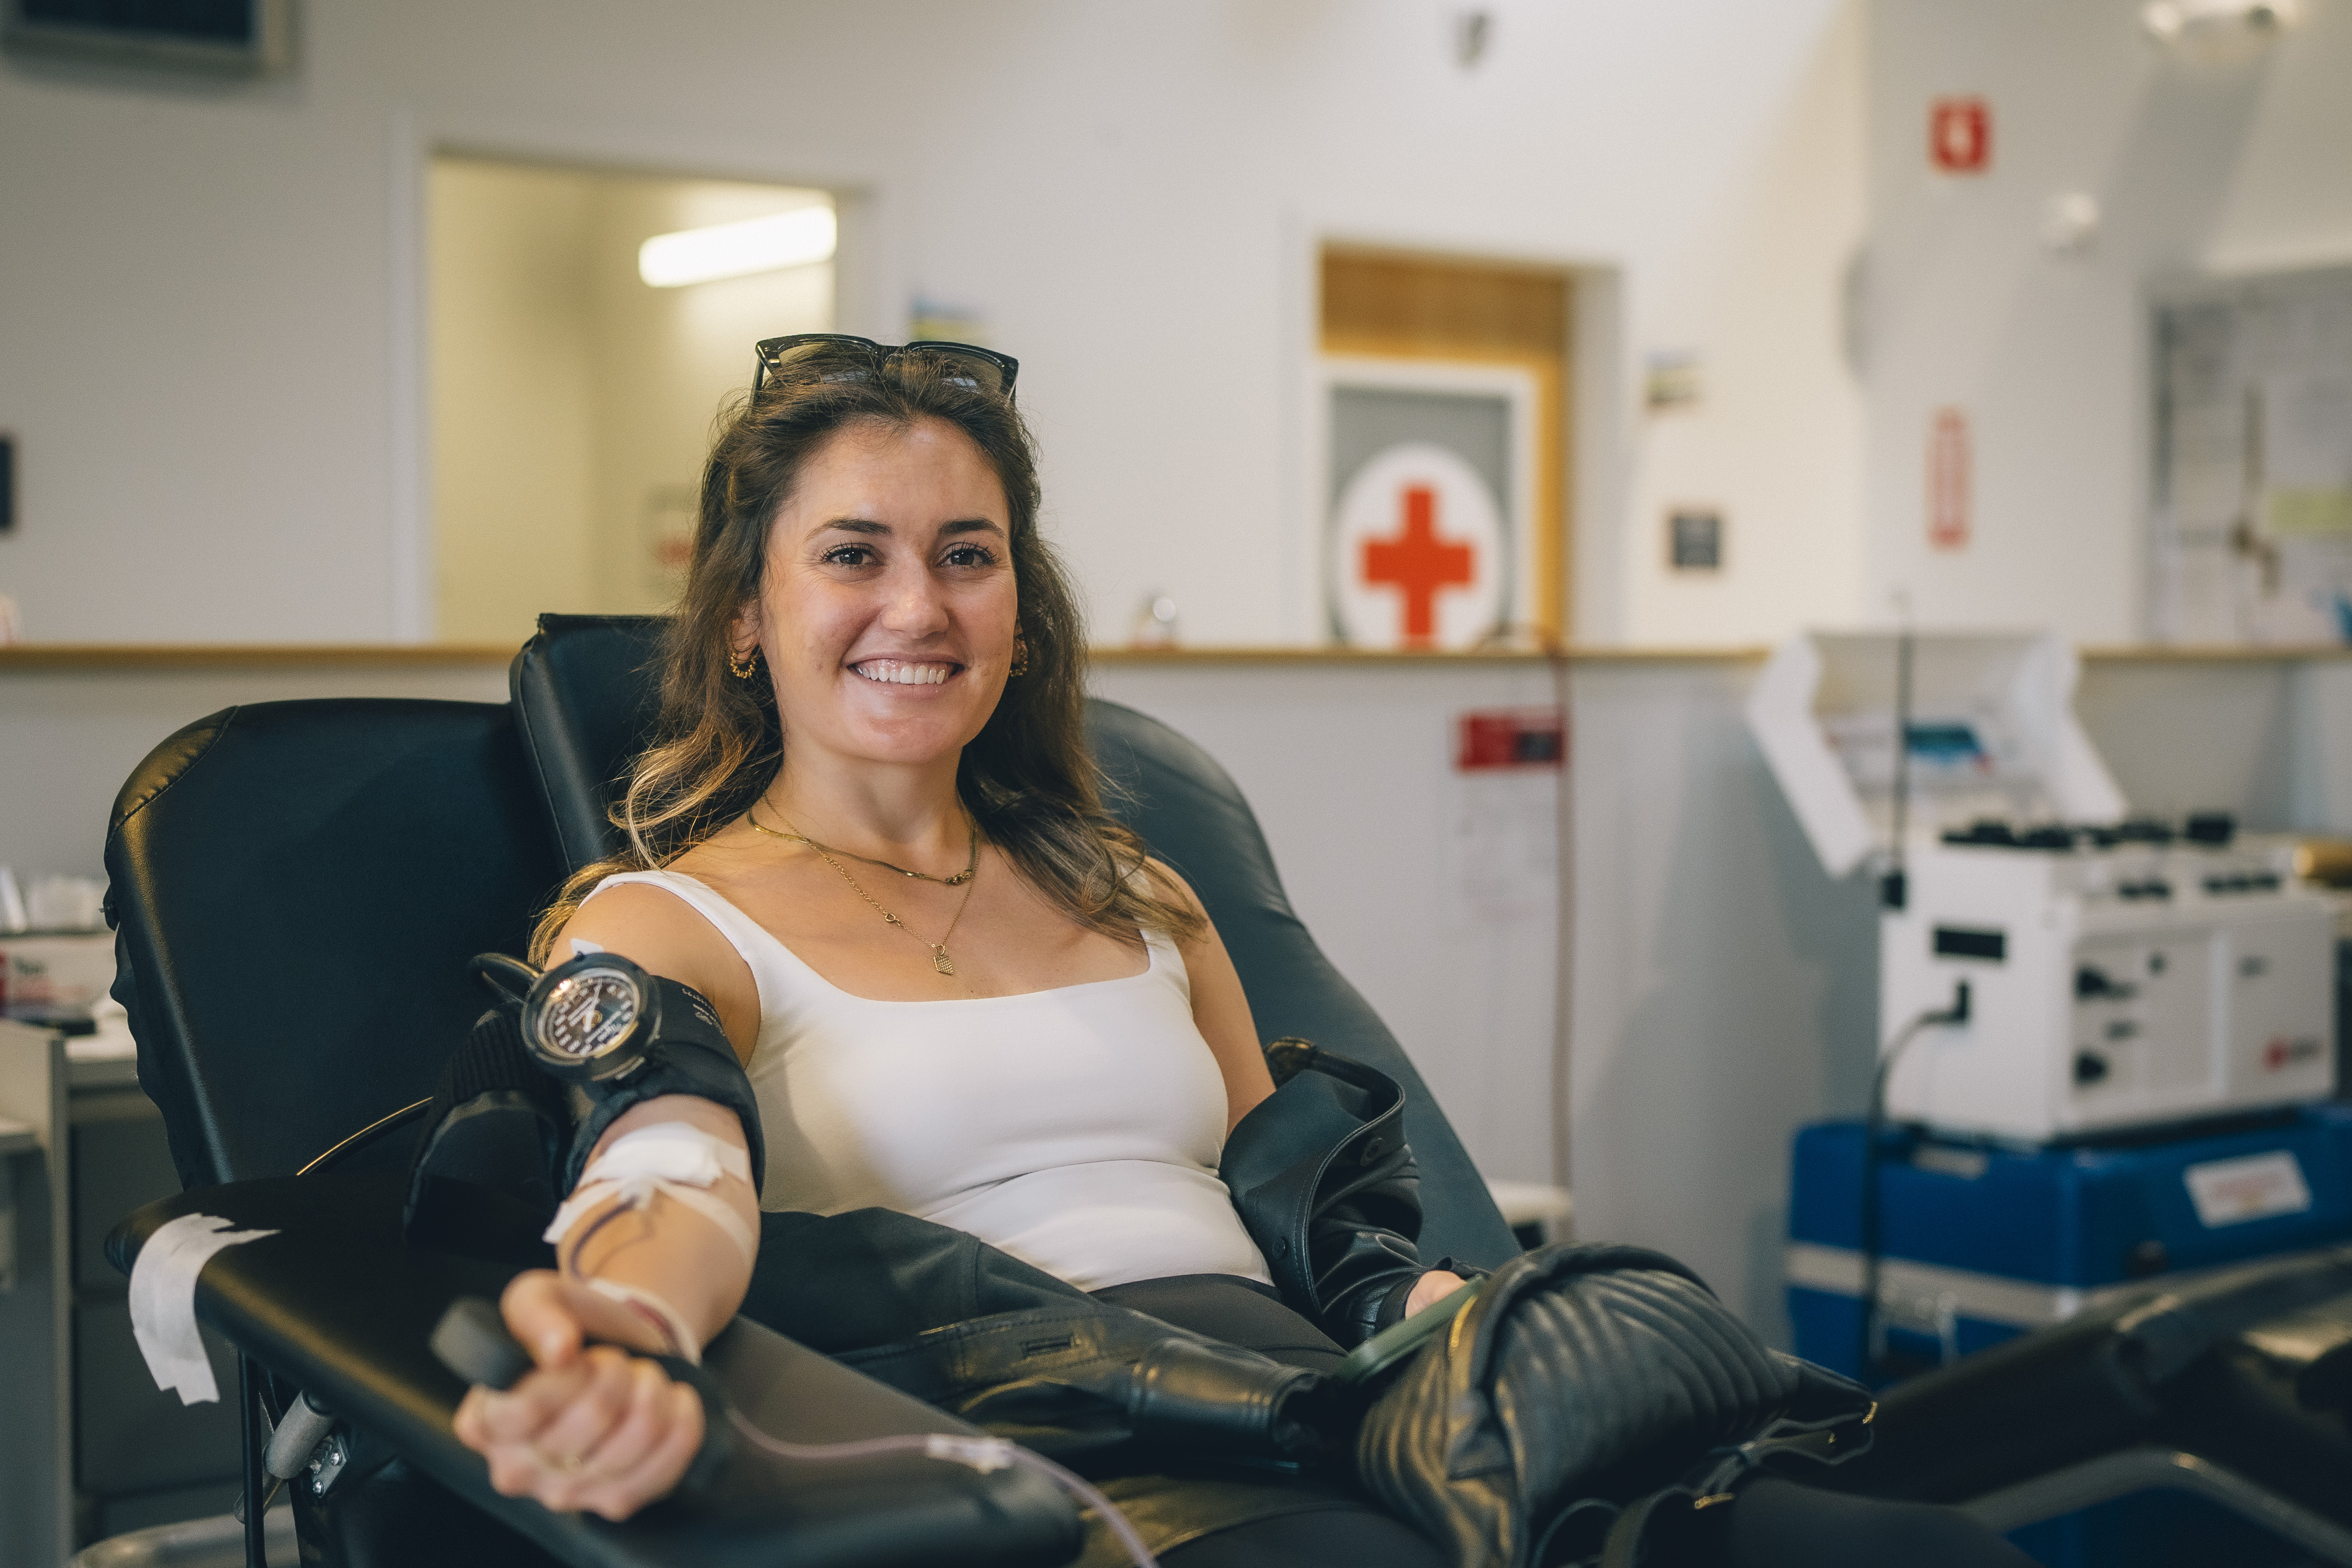 Allana donating blood with the American Red Cross